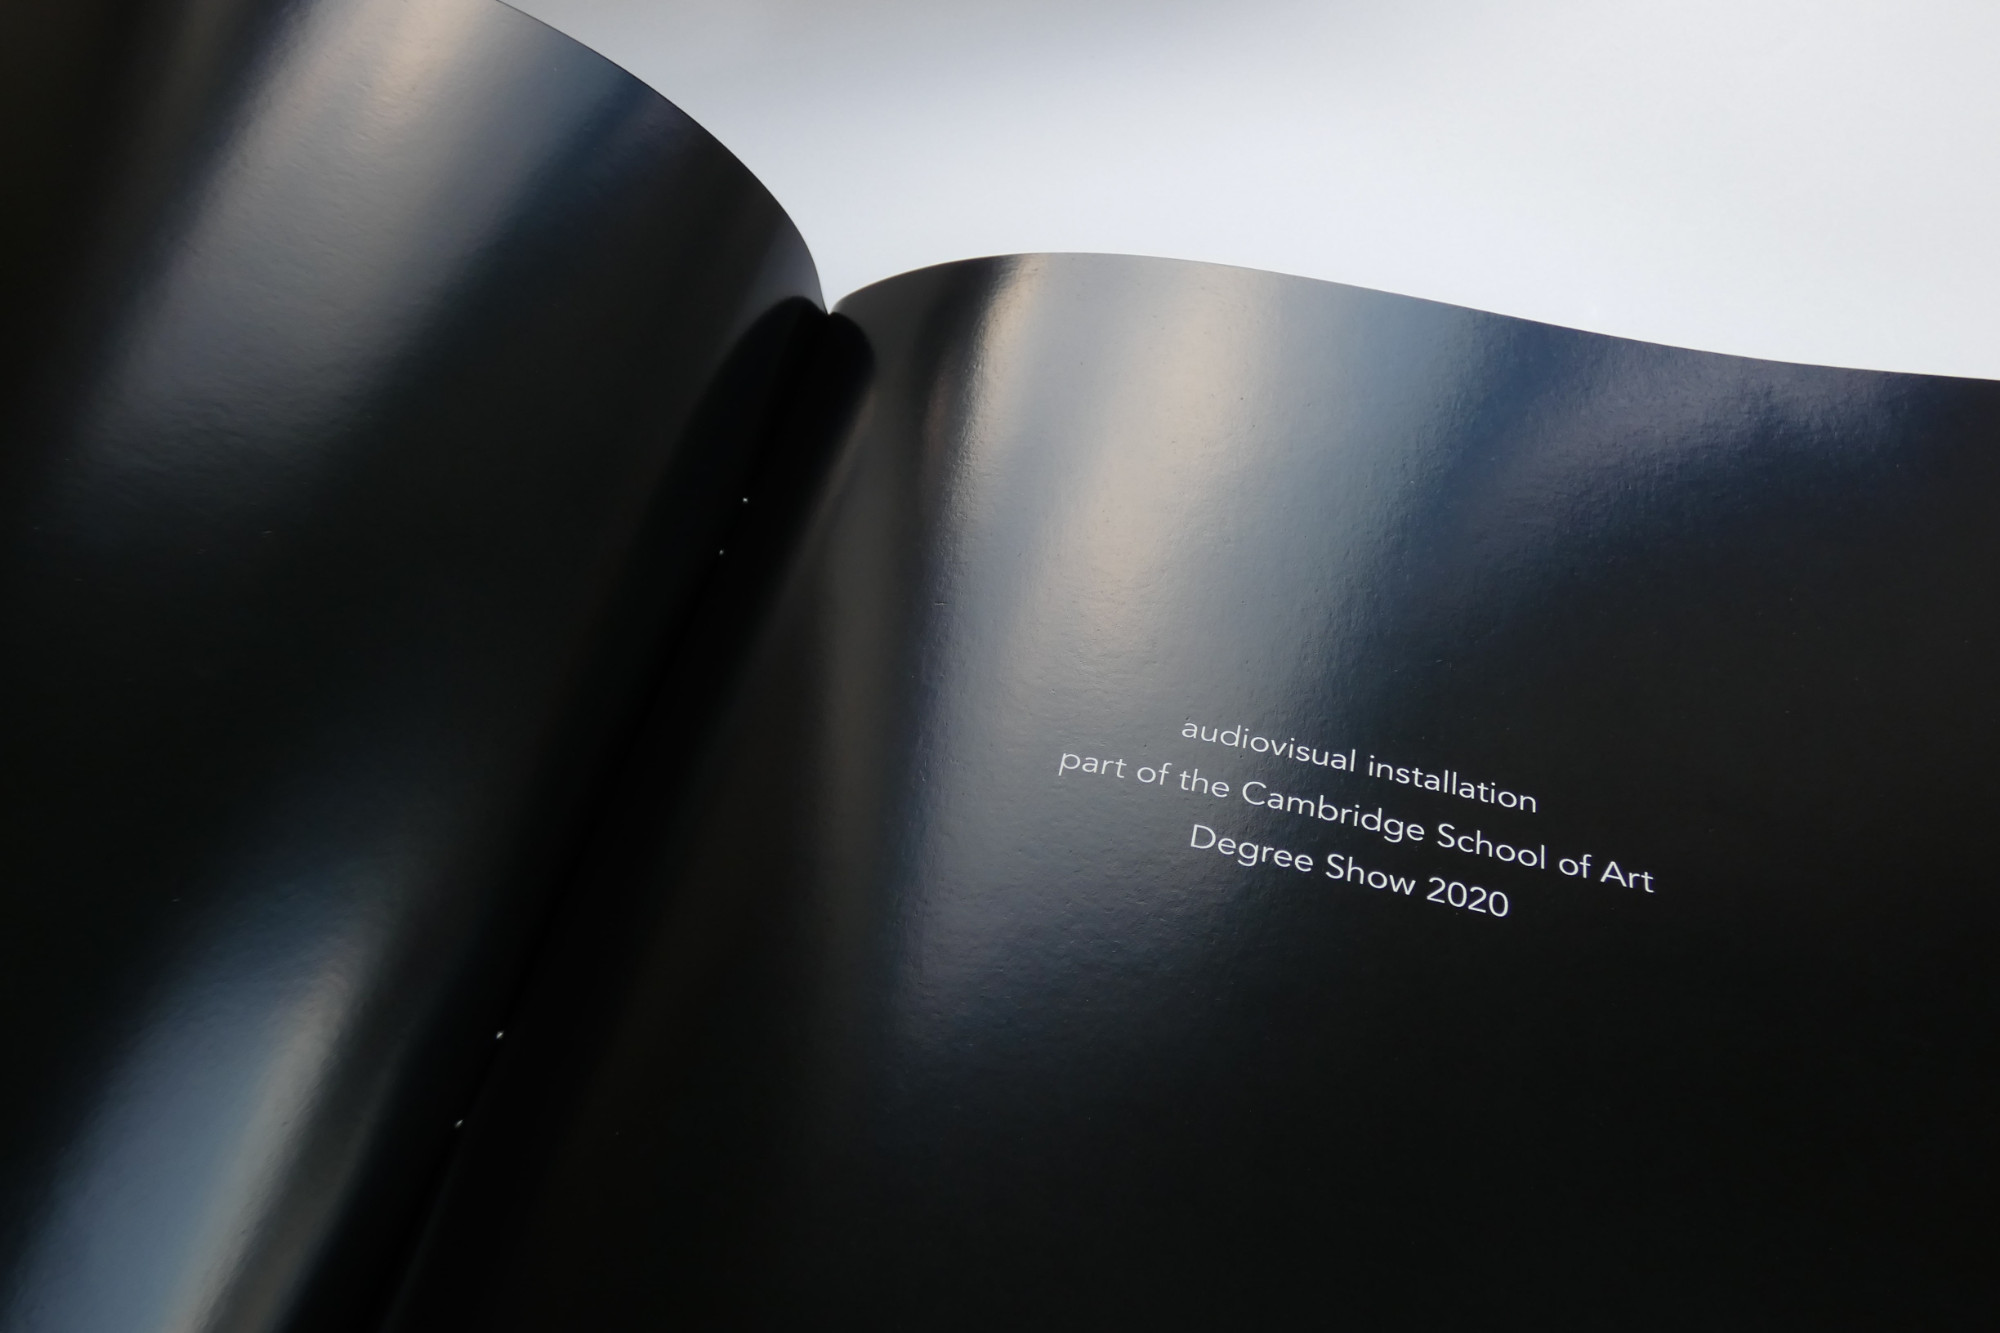 The first page of the exhibition catalogue was designed for the physical degree show that was going to take place in summer of 2020. Diana Montañez Rivera.